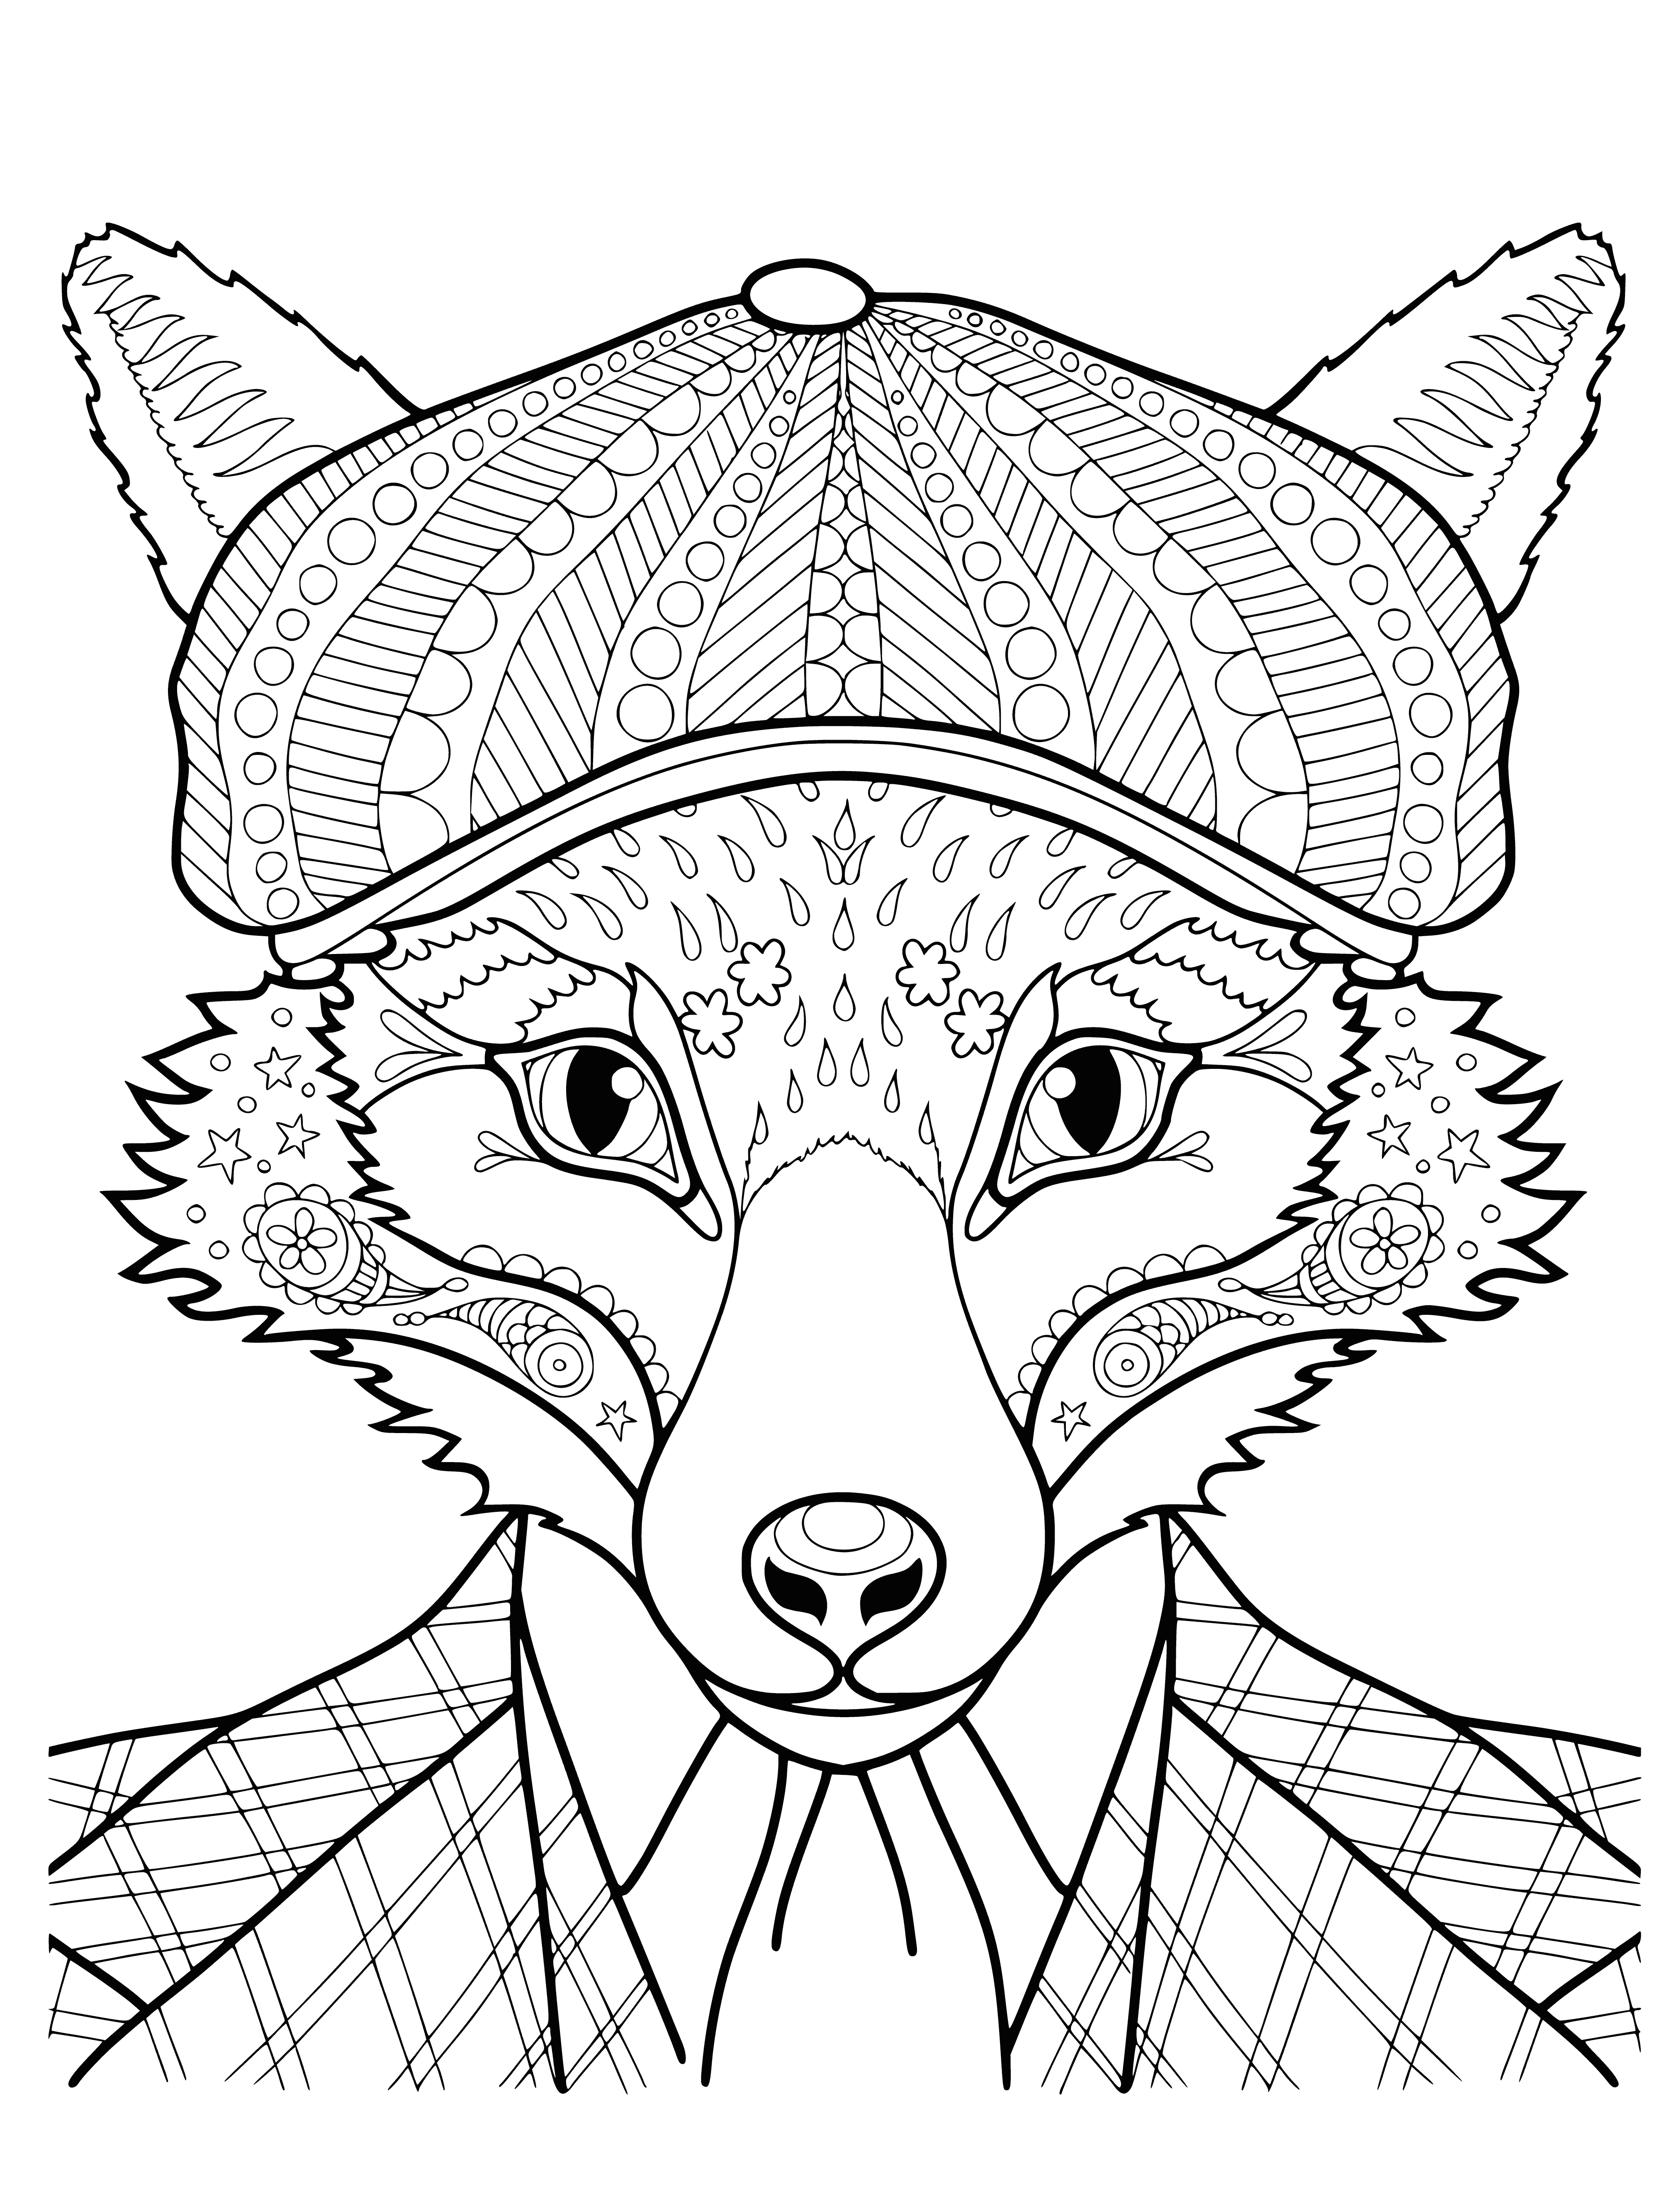 Mrs. Fox coloring page